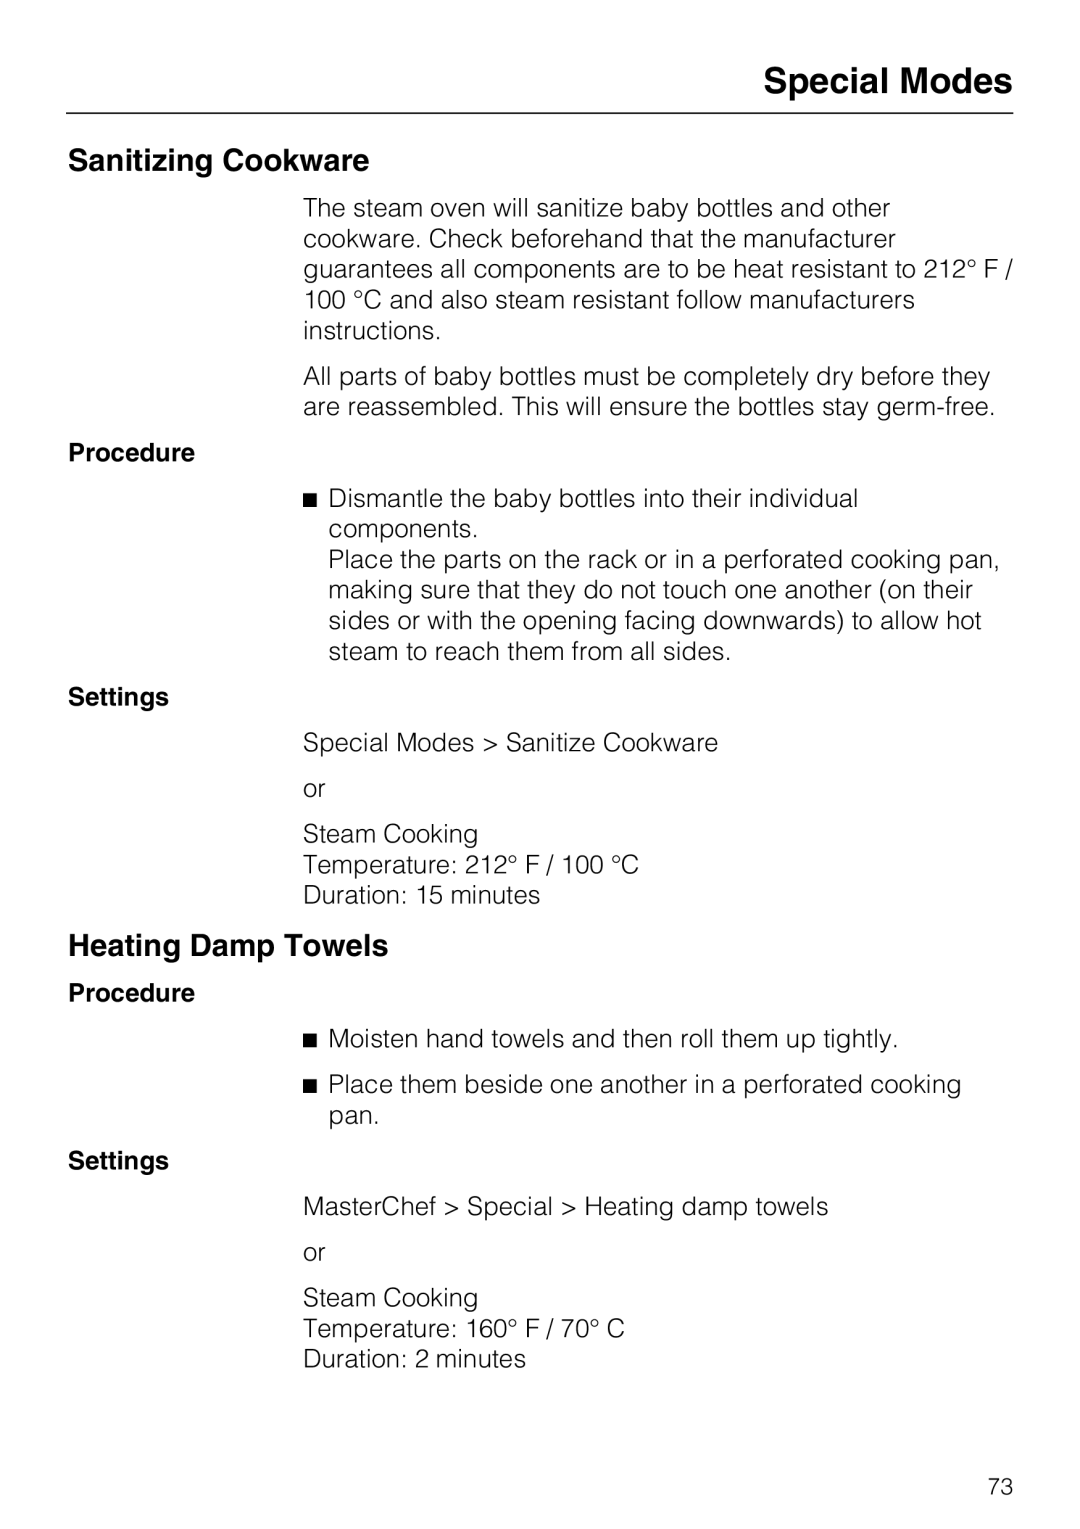 Miele 09 800 830 installation instructions Sanitizing Cookware, Heating Damp Towels, Special Modes 